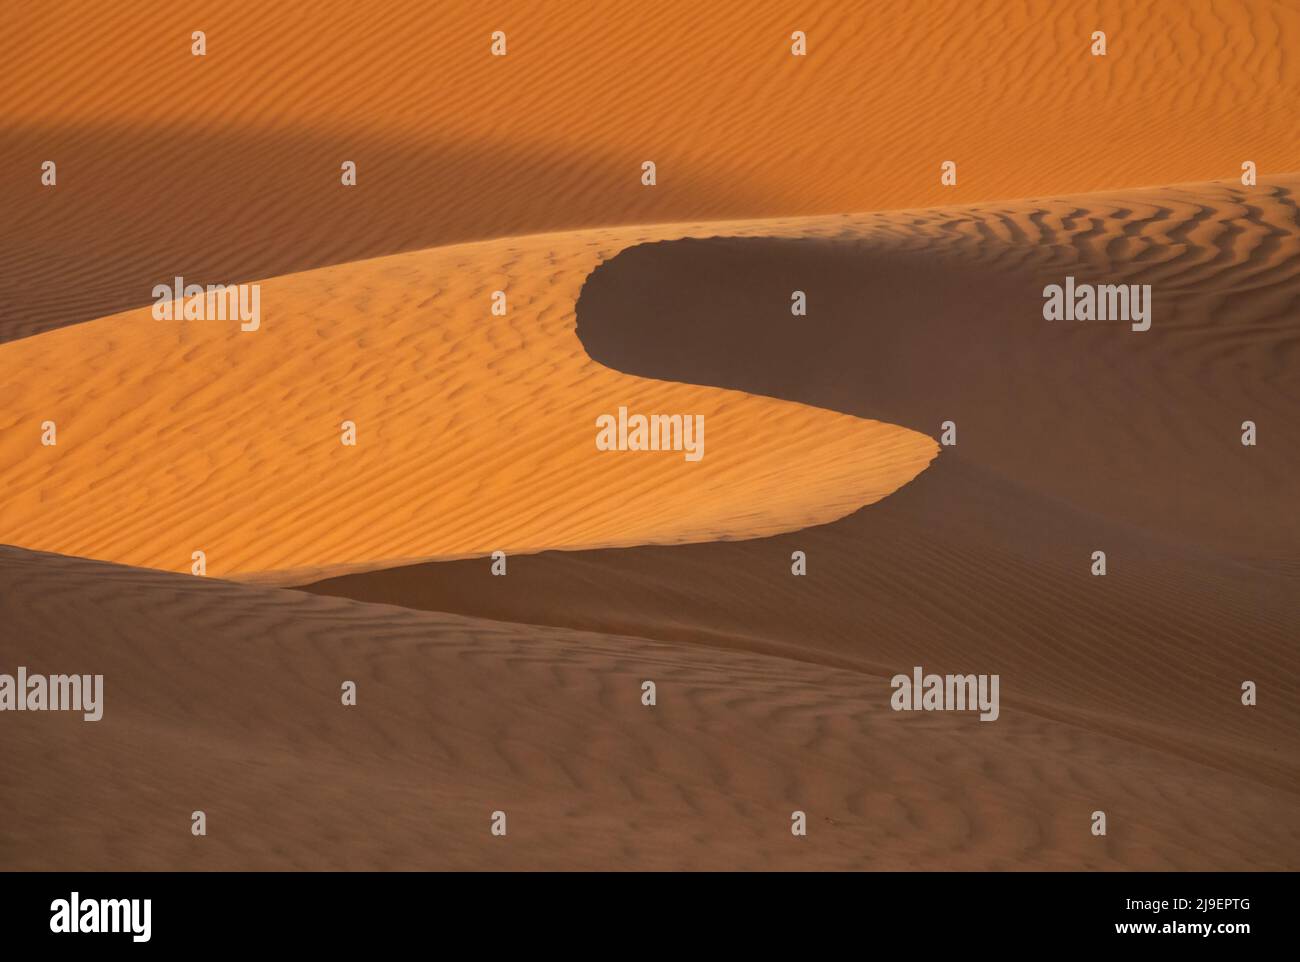 Background with sandy dunes in desert Stock Photo